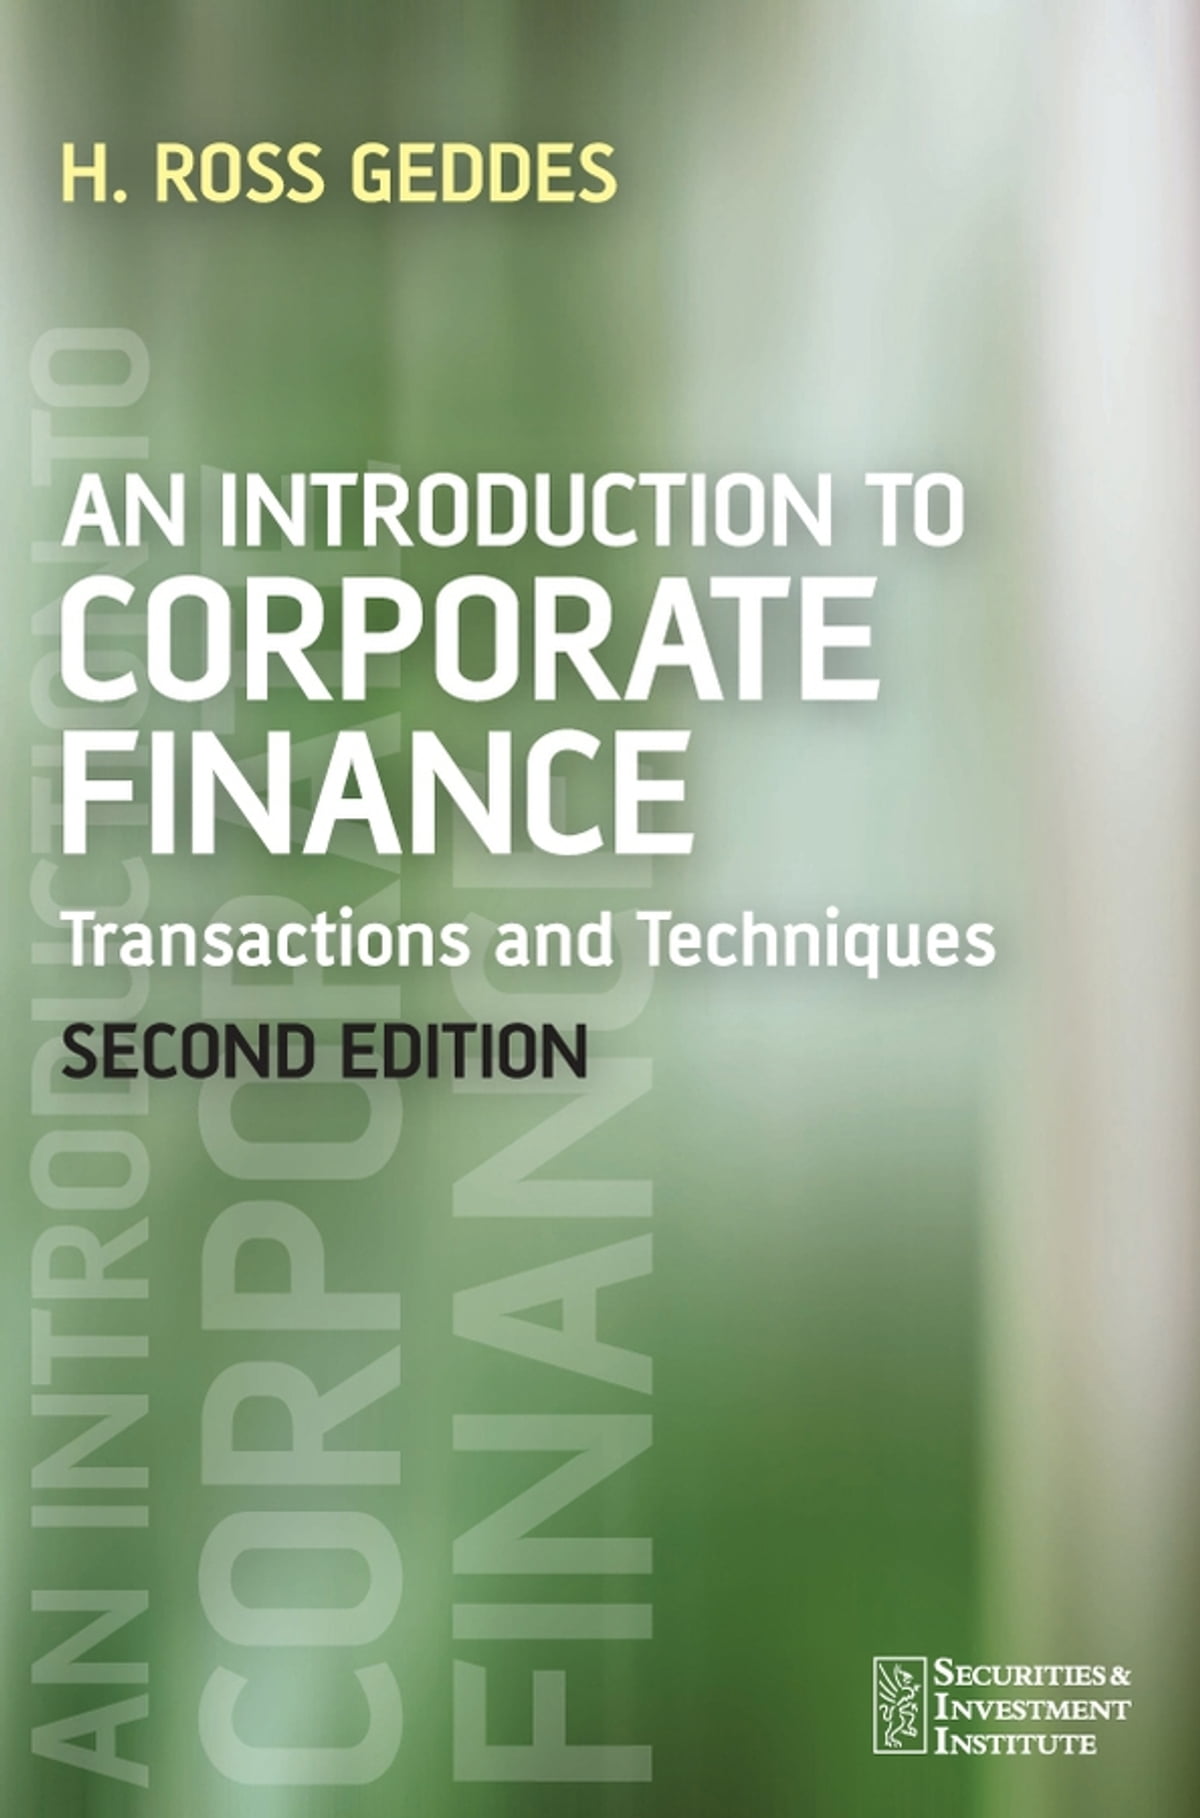 An Introduction to Corporate Finance Transactions and Techniques by H Ross Geddes